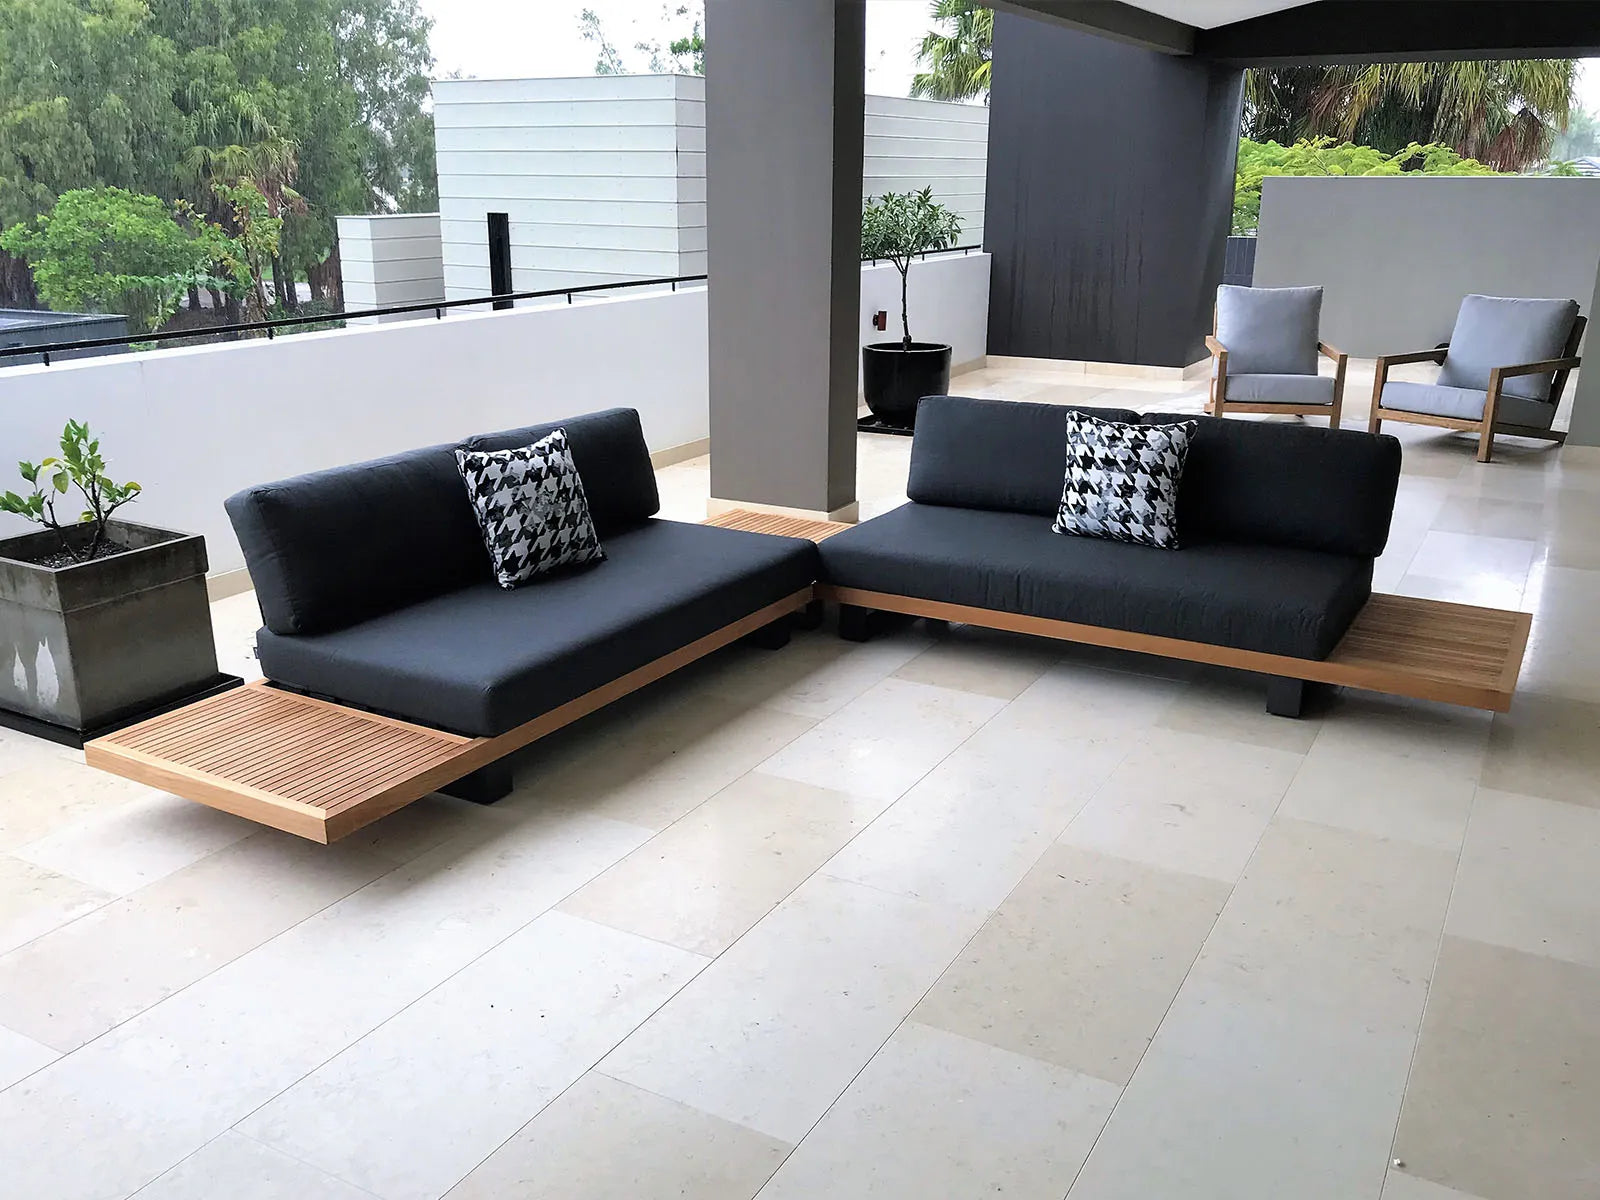 Truro 4 Seater Outdoor Lounge Setting